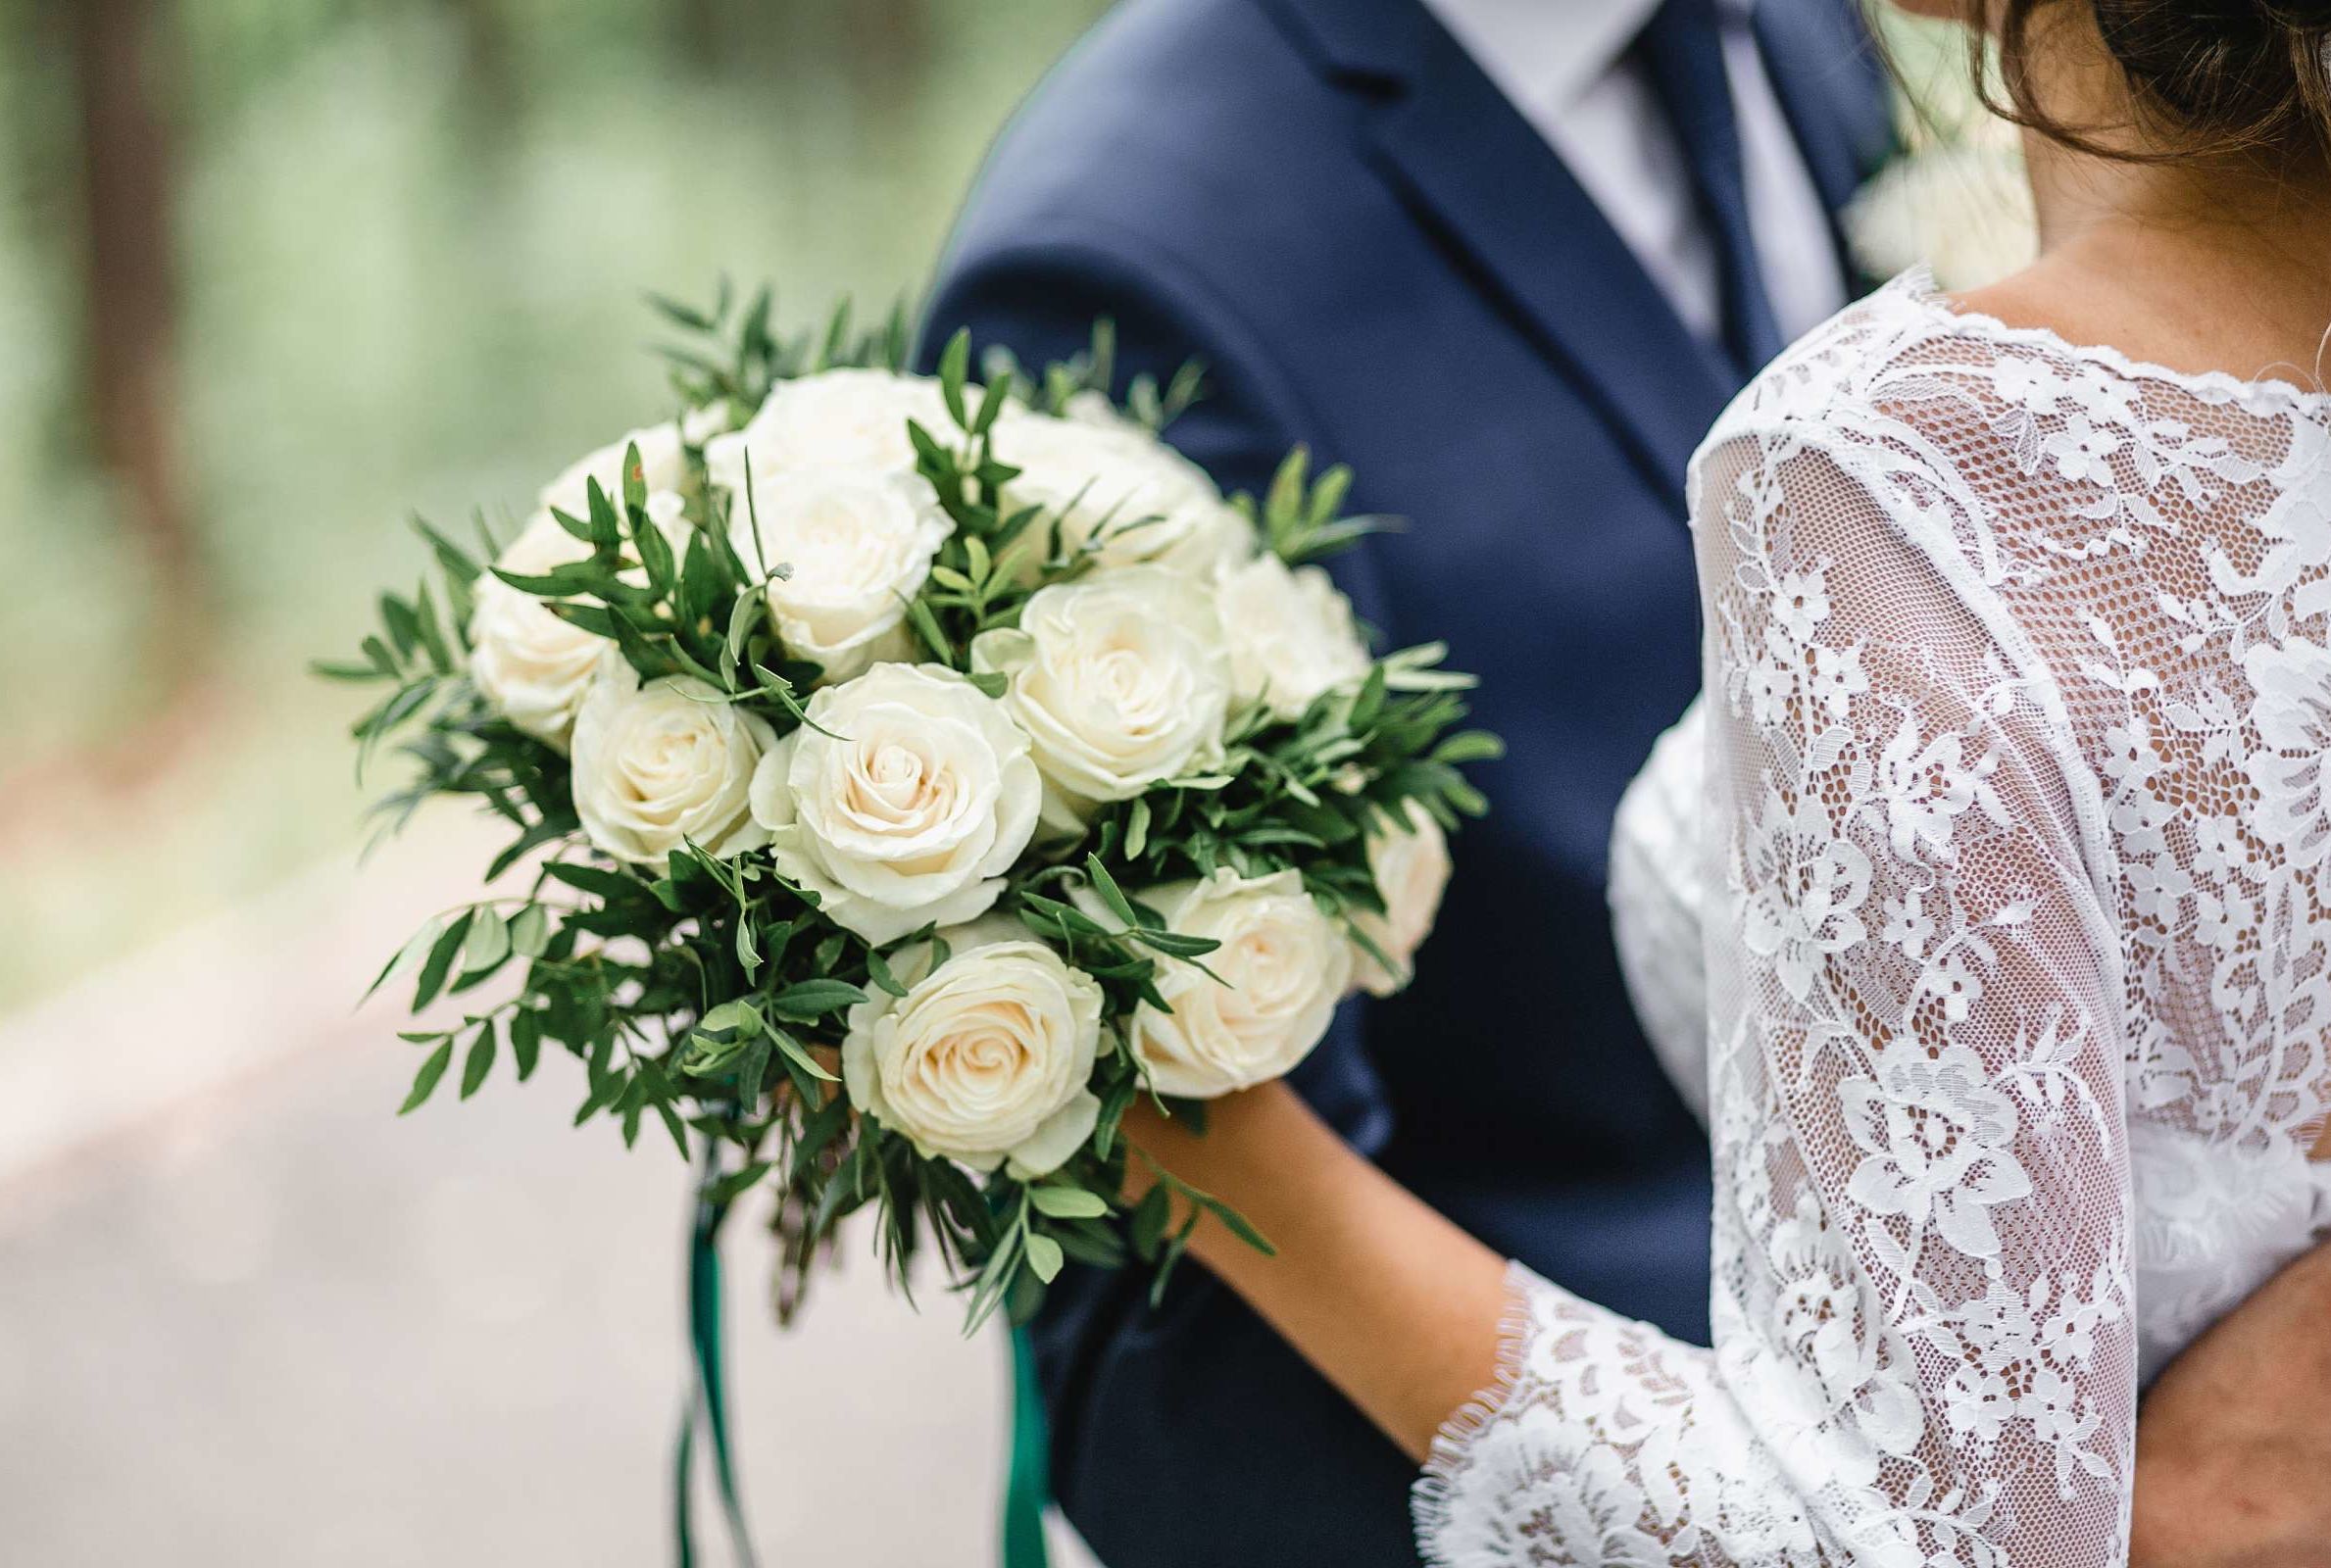 A bride and groom holding white roses, symbolizing love and purity on their wedding day.